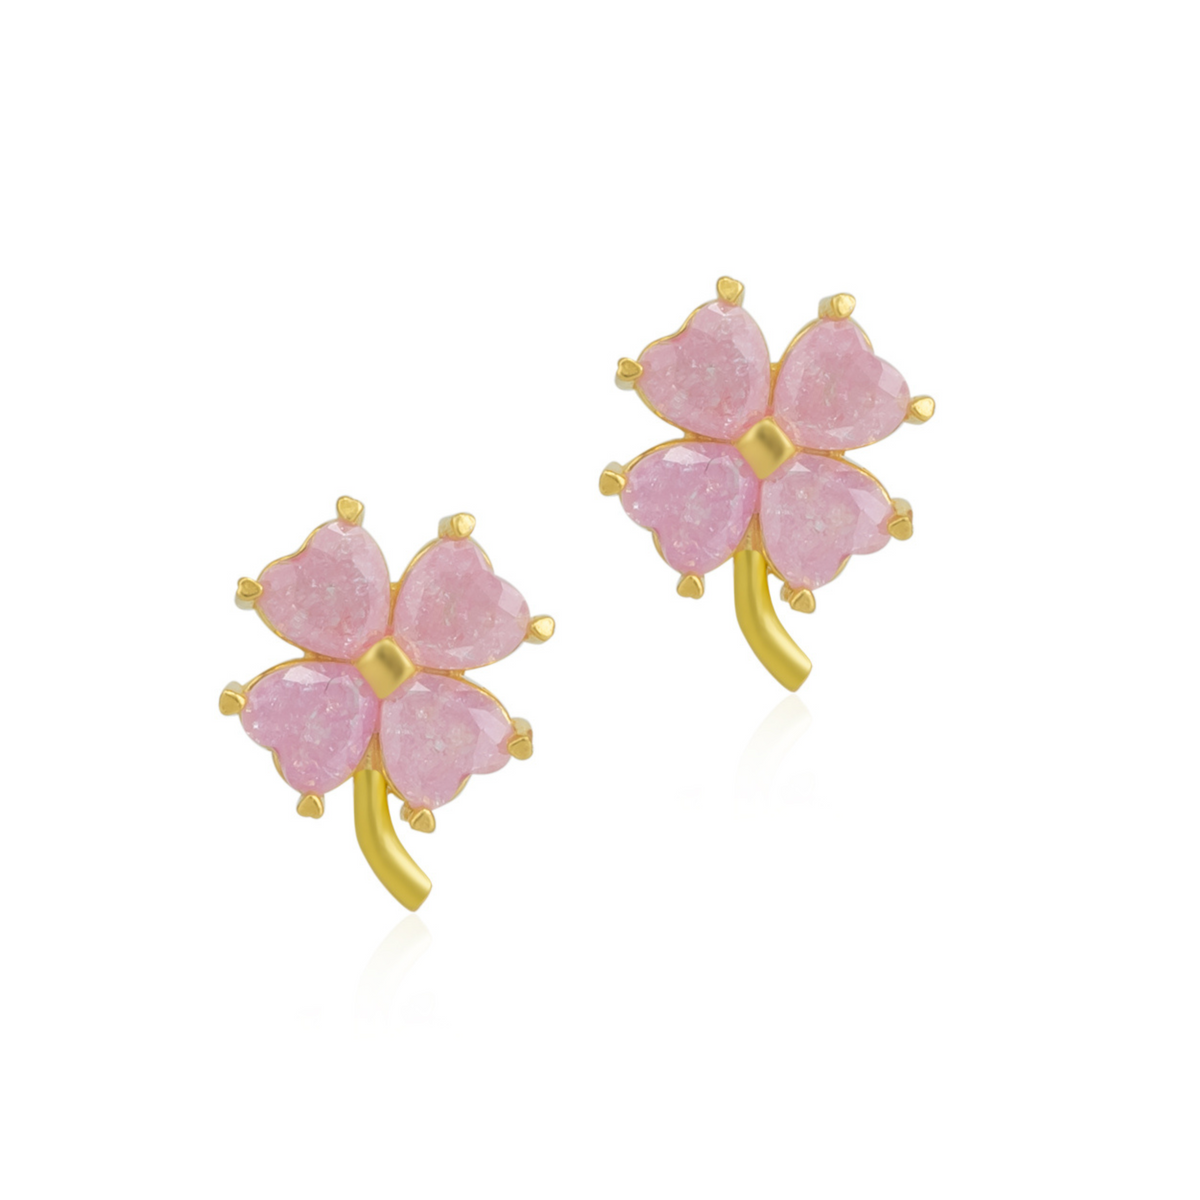 Four Leaves Clover Sterling Silver Stud Earring - Pink